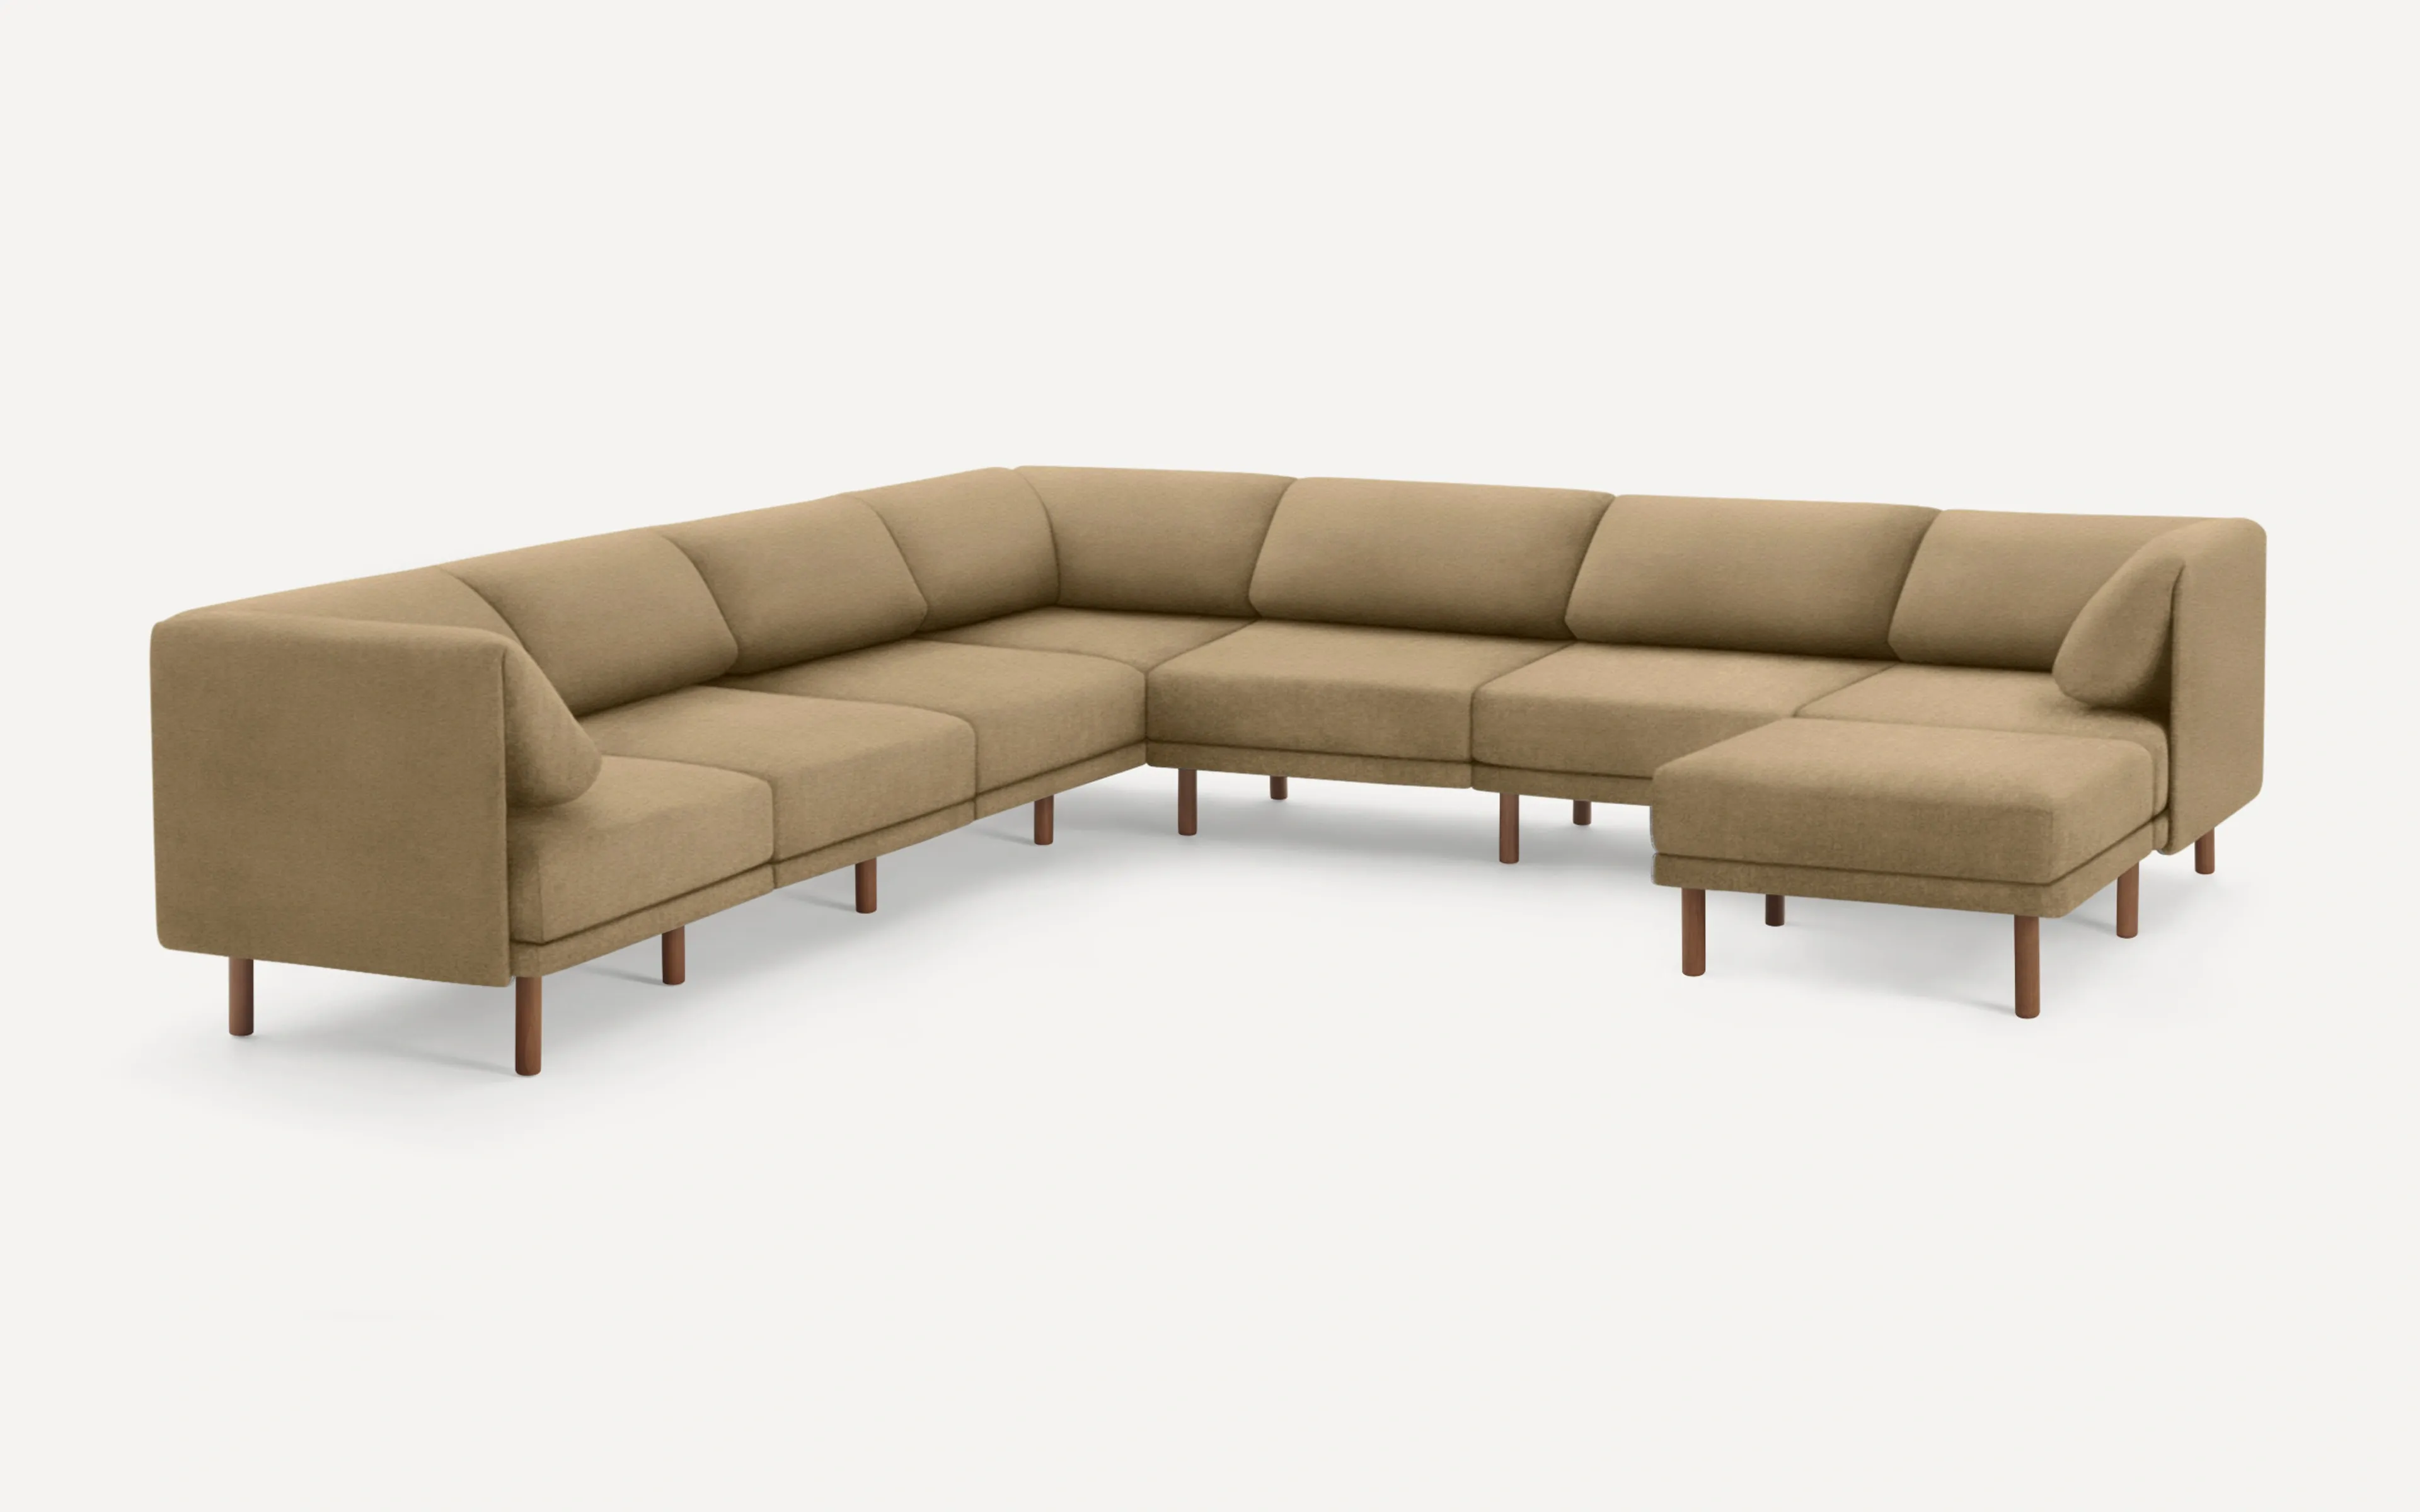 Range 8-Piece Sectional Lounger